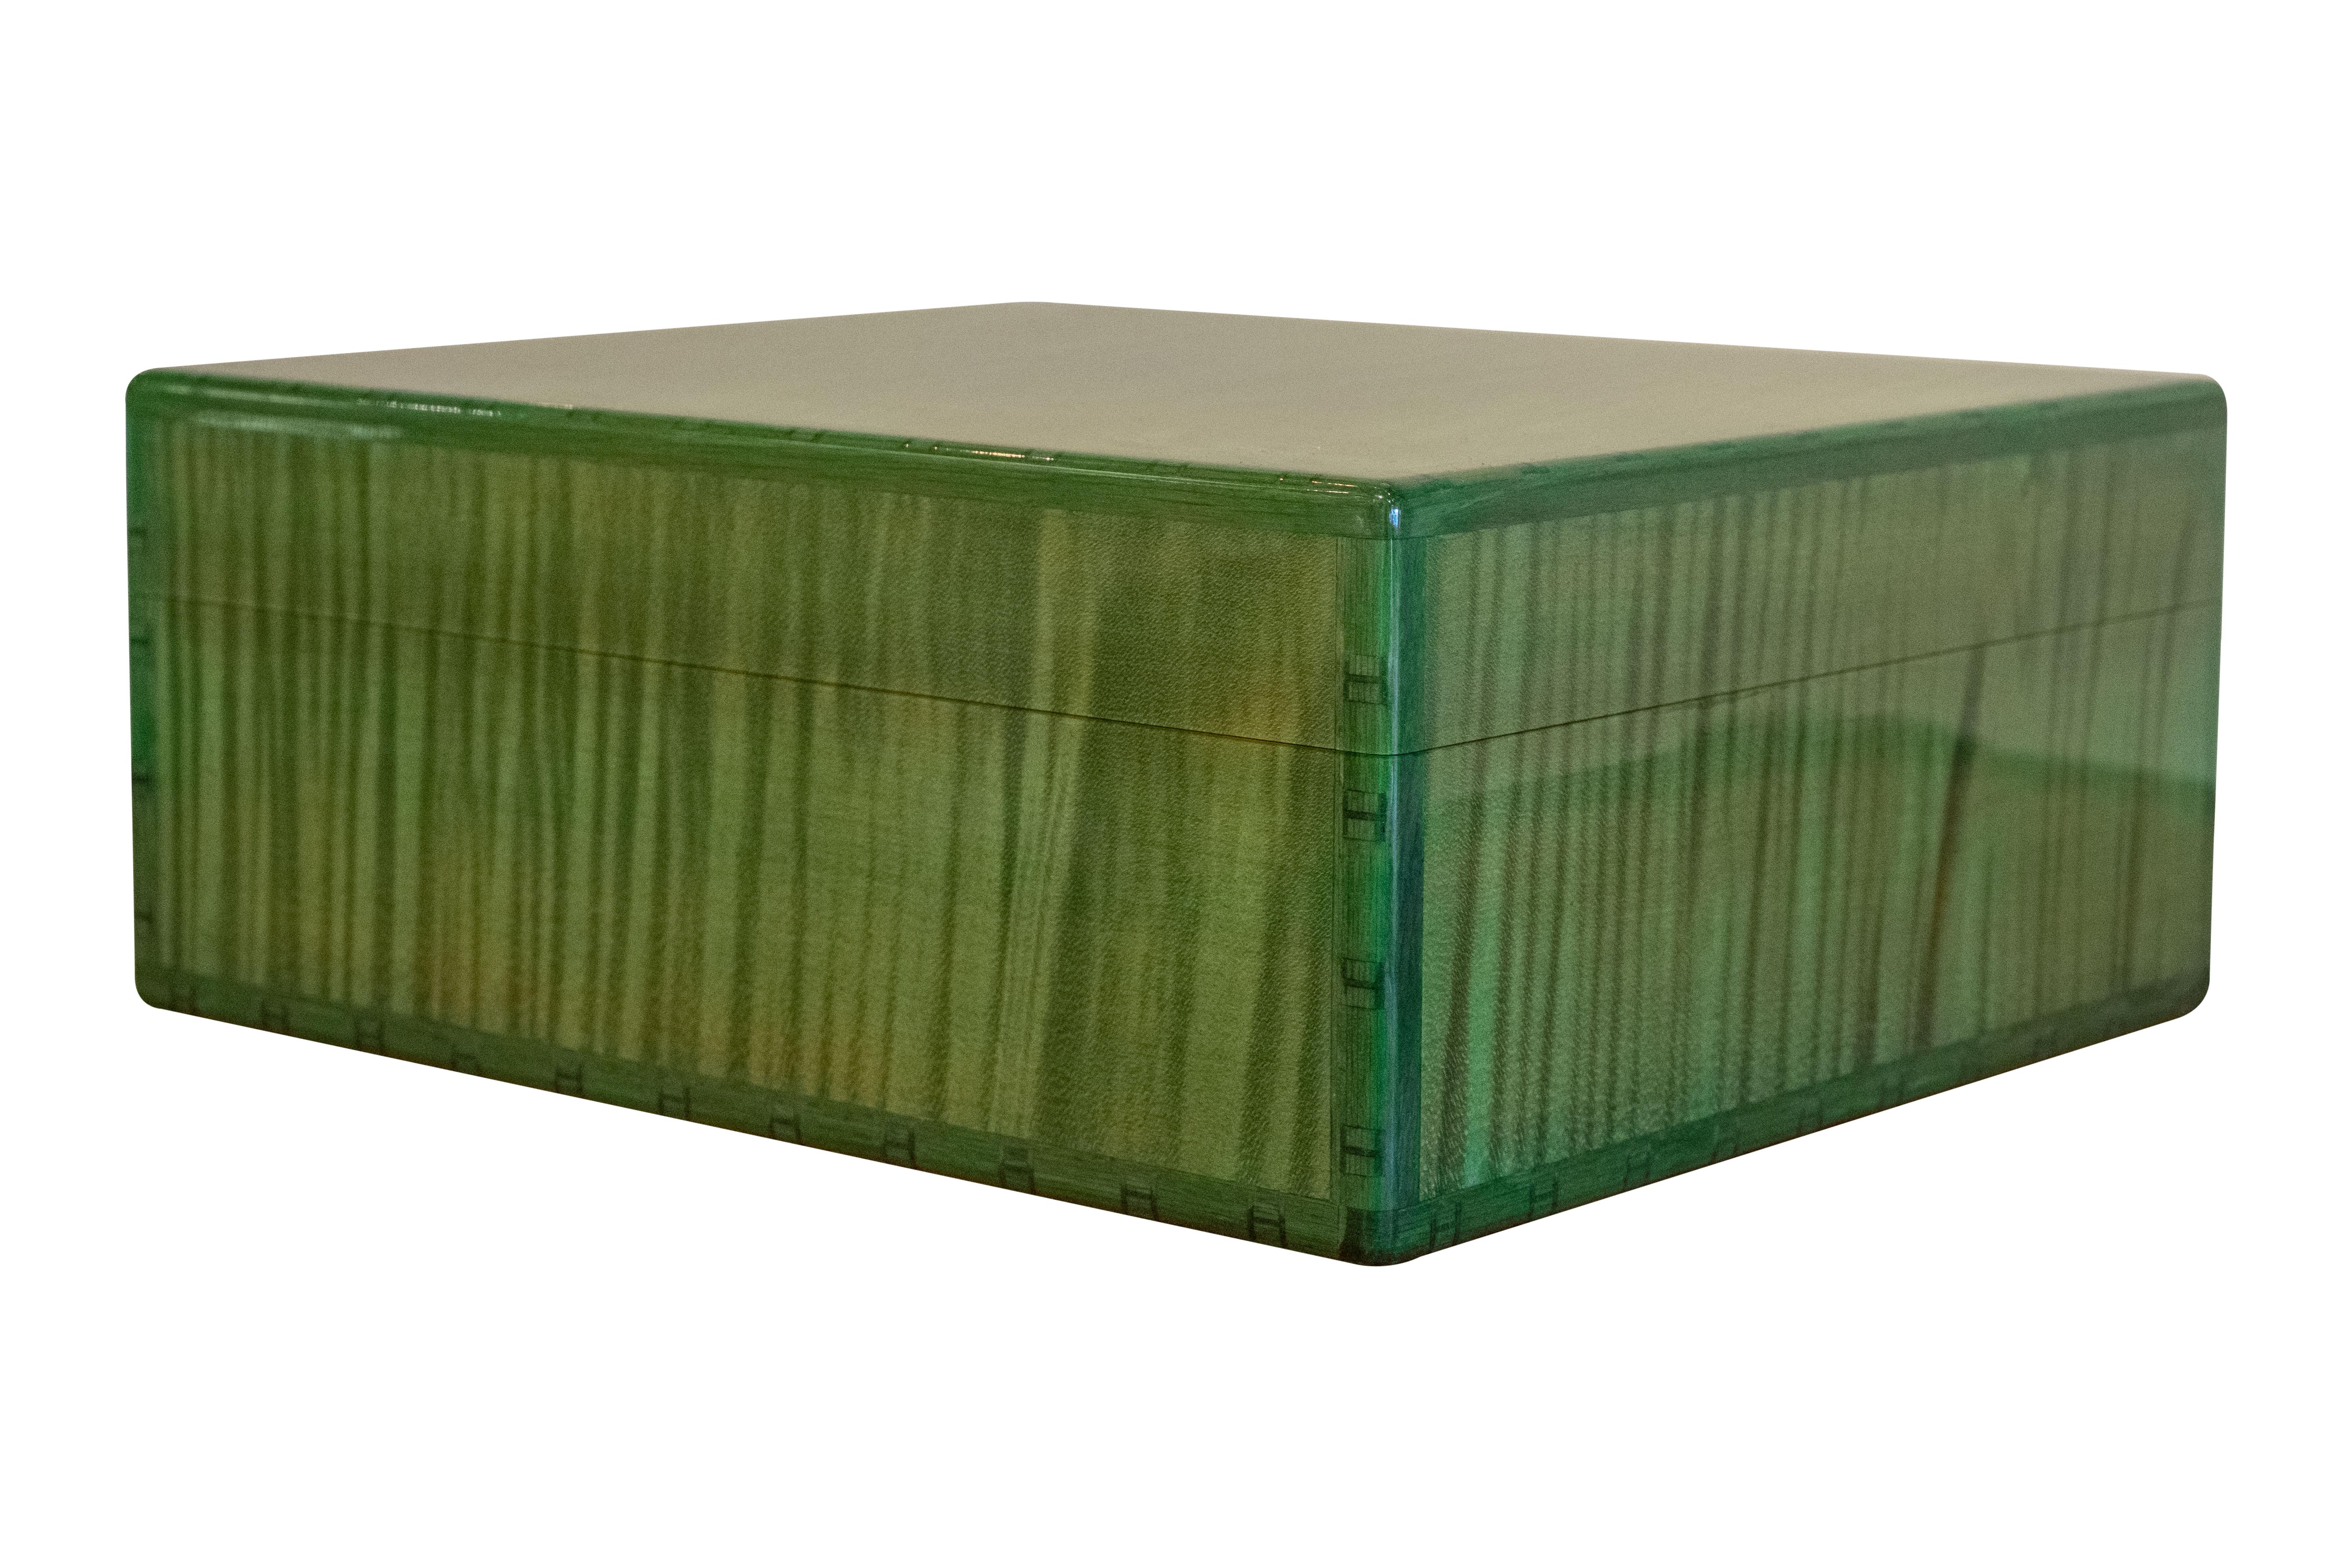 Designed to maintain cigars’ moisture levels, this Hermès Humidor has an inside lining of cedar wood. The outside is a beautiful, vibrant green. For those non-smokers, this Humidor could also double as a jewelry box, or a box for any type of knick